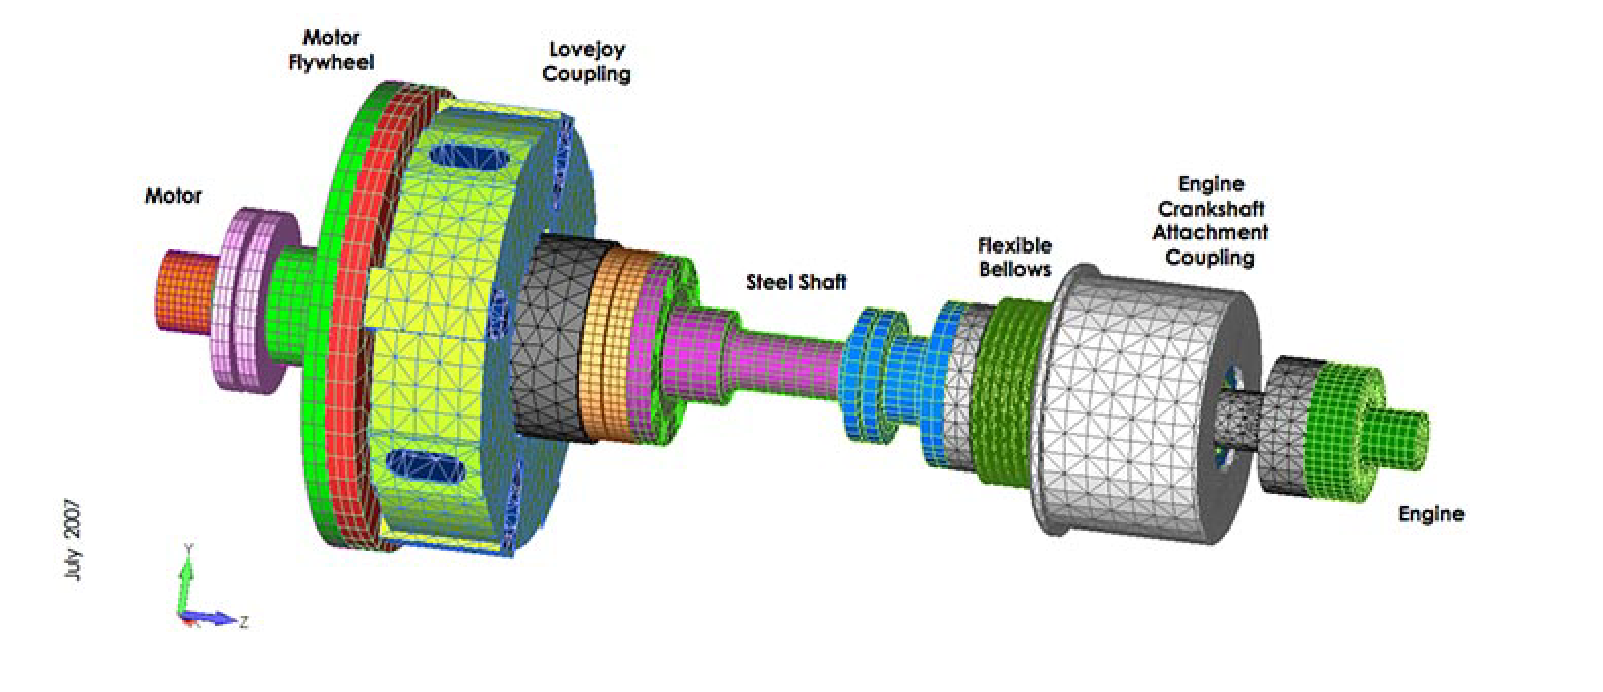 Various components (Rubber Couplings, Steel Shaft) idealized into the FEA Vibration Model.  Digital Prototyping of Vibratory Systems - Consulting Engineering